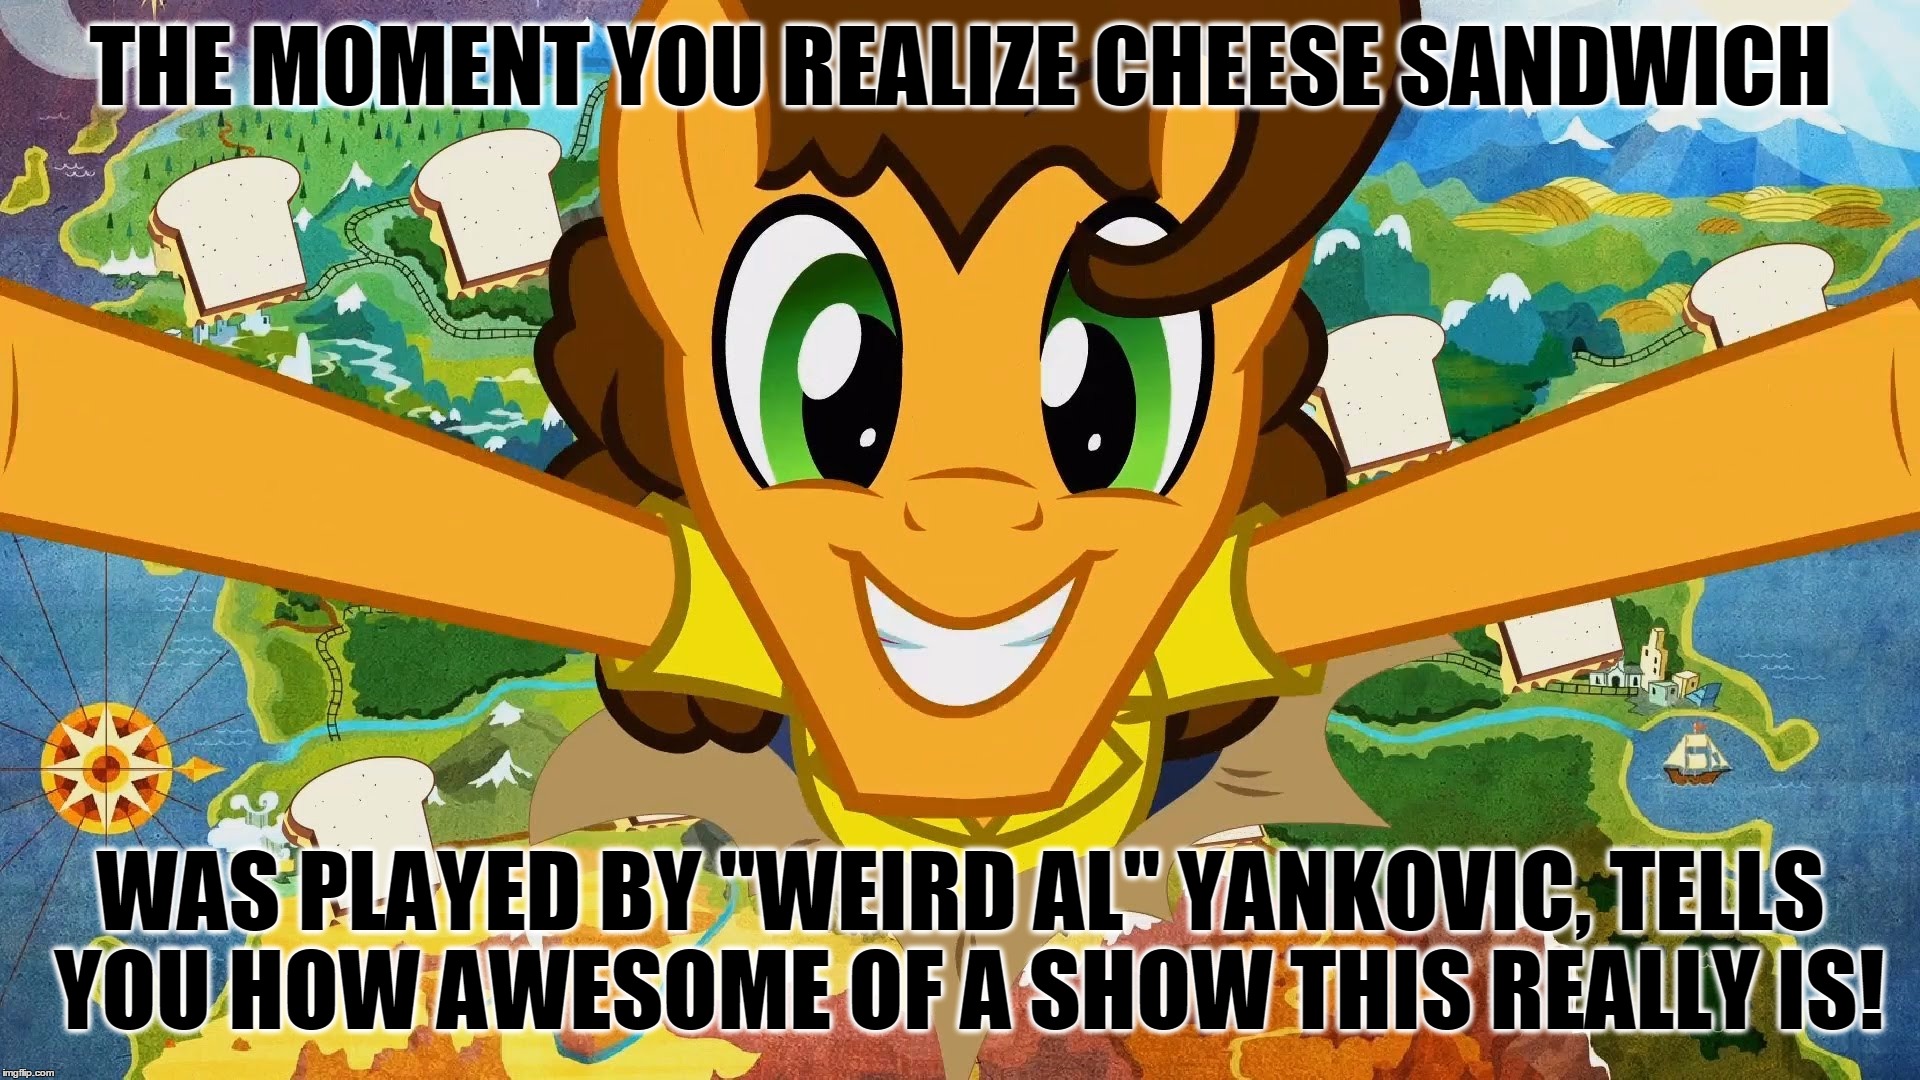 THE MOMENT YOU REALIZE CHEESE SANDWICH; WAS PLAYED BY "WEIRD AL" YANKOVIC, TELLS YOU HOW AWESOME OF A SHOW THIS REALLY IS! | made w/ Imgflip meme maker